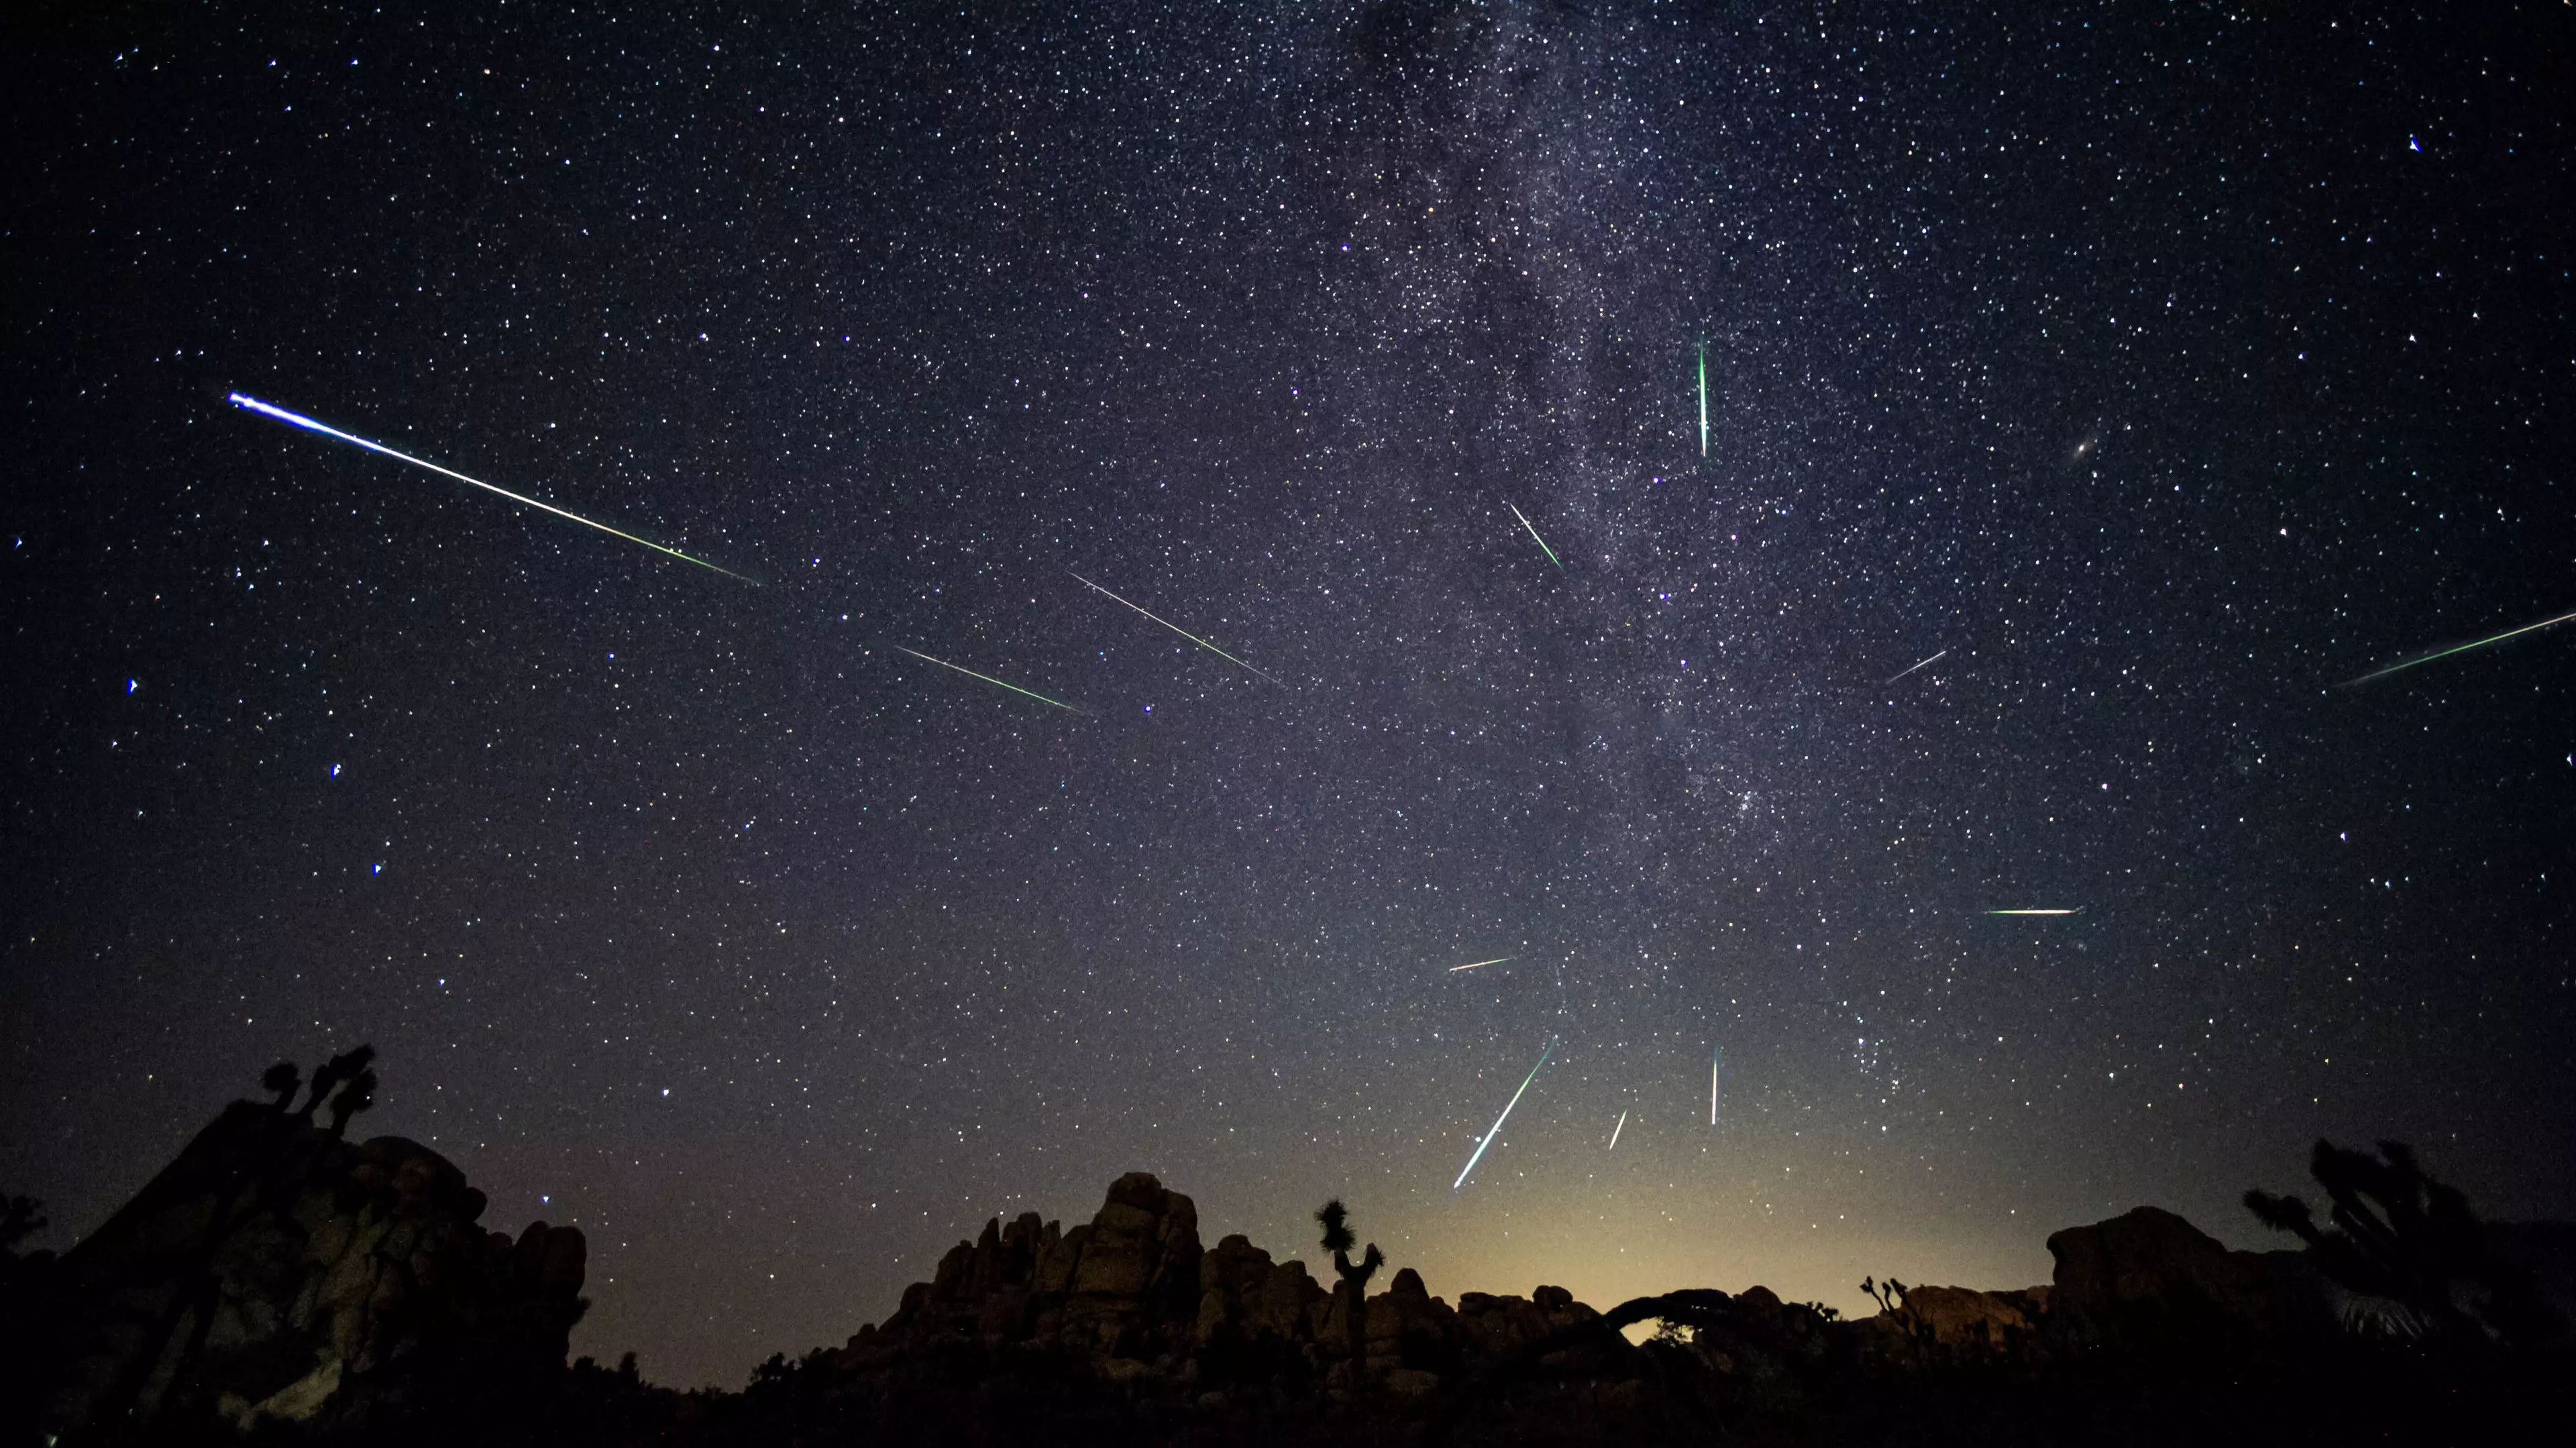 Hundreds Of Multi-Coloured Shooting Stars Will Streak Across The Sky This Weekend